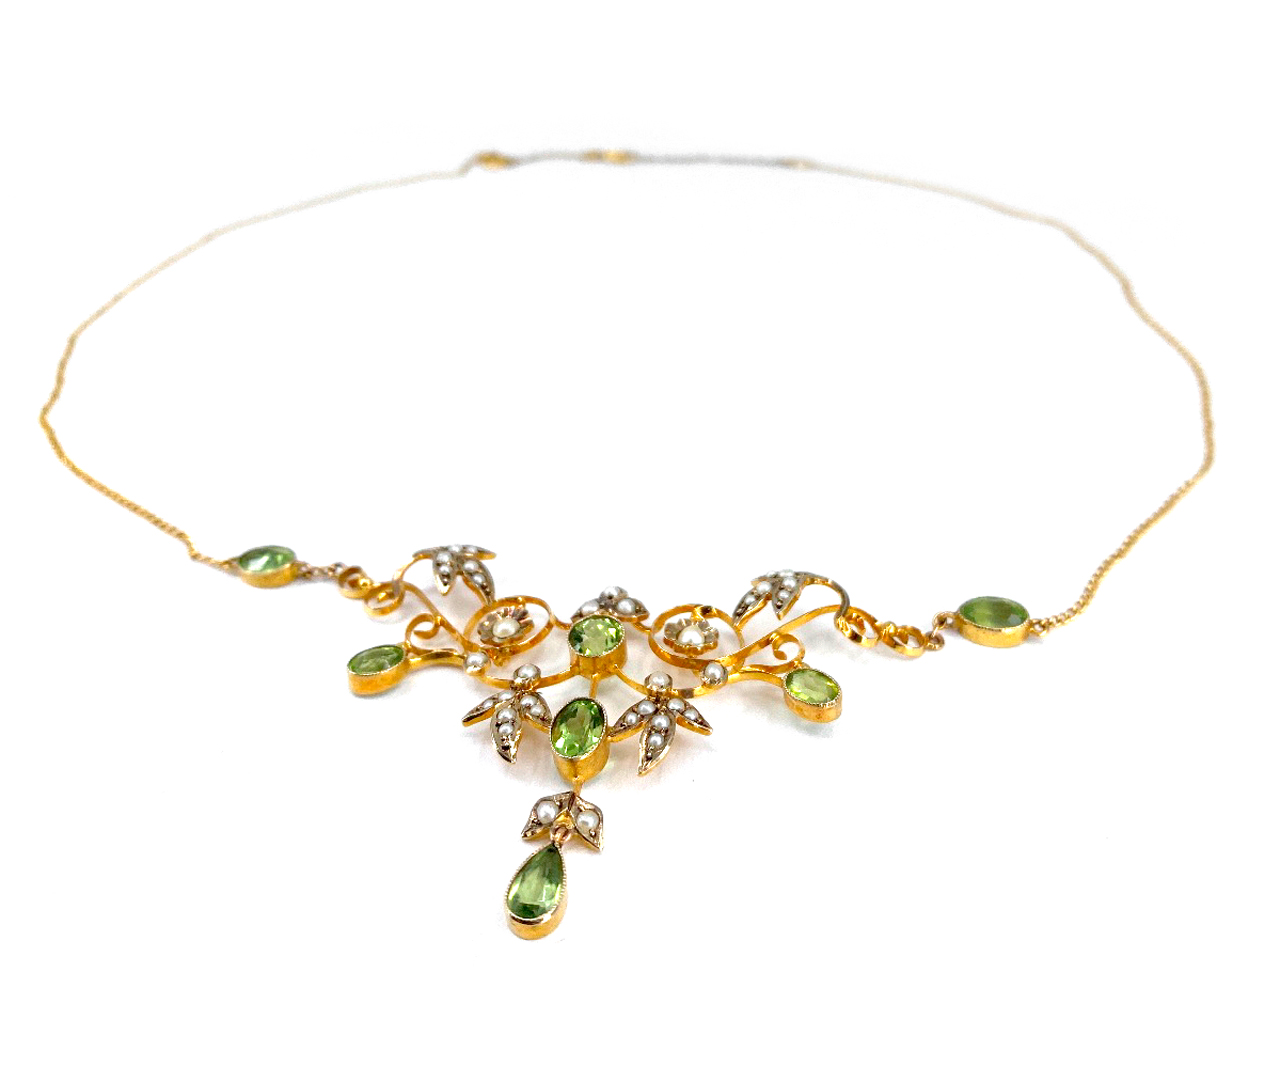 Jenny Lind Peridot, Citrine and Pearl Necklace : Museum of Jewelry